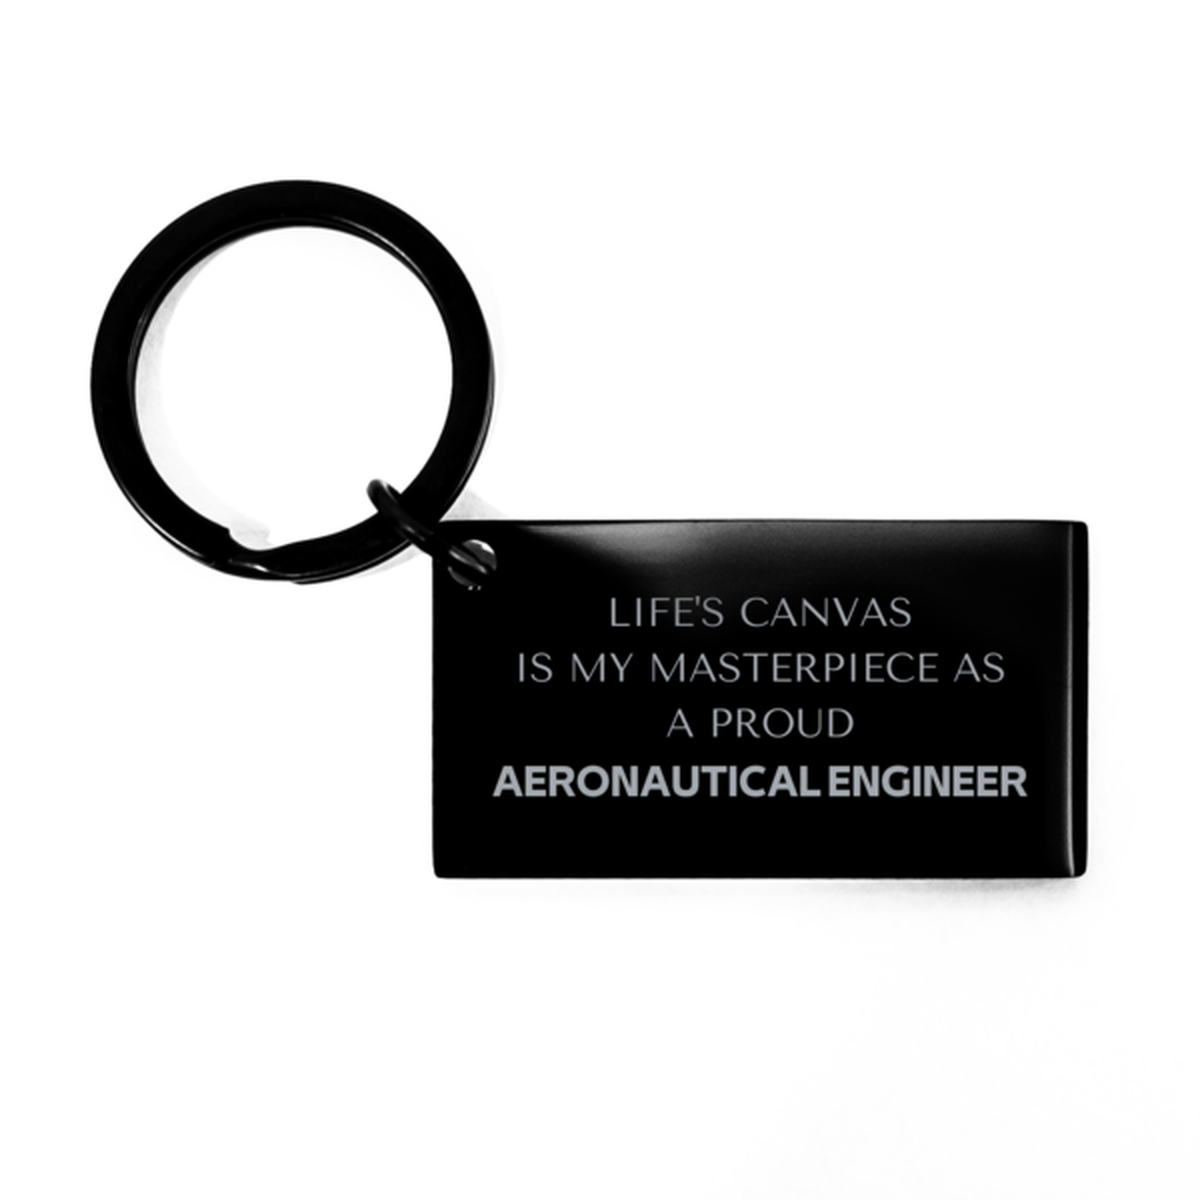 Proud Aeronautical Engineer Gifts, Life's canvas is my masterpiece, Epic Birthday Christmas Unique Keychain For Aeronautical Engineer, Coworkers, Men, Women, Friends